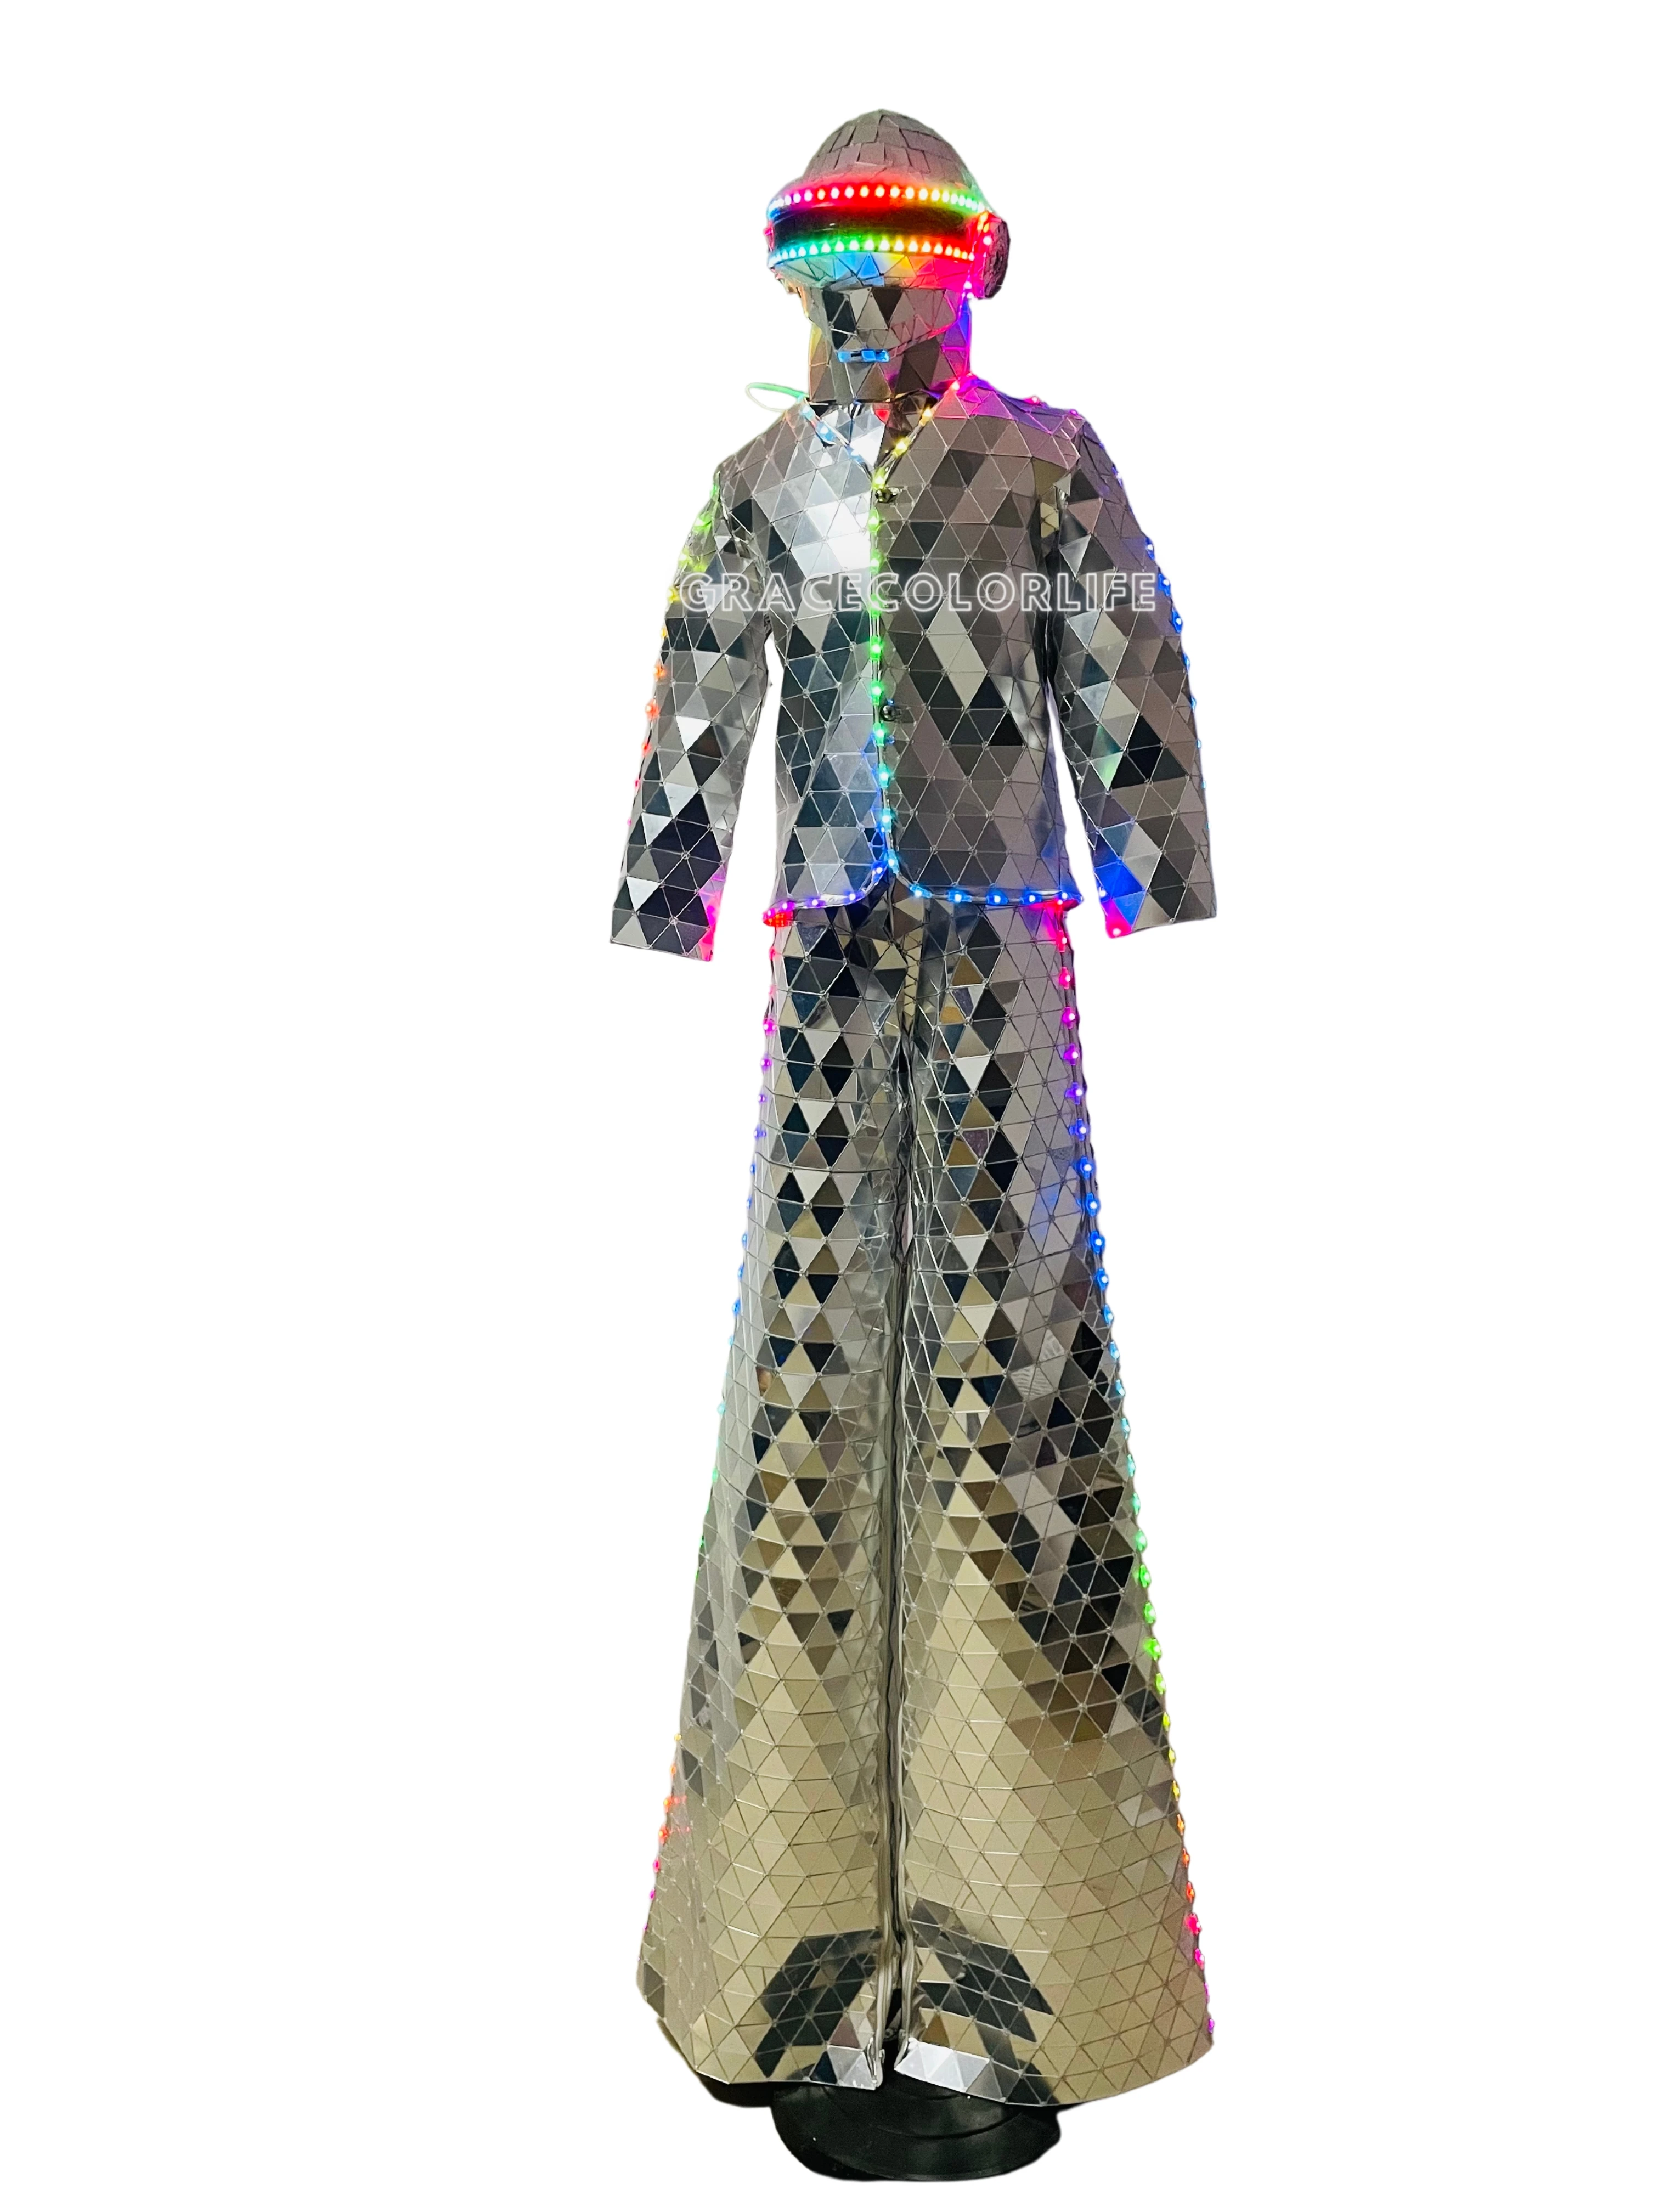 

Silver Mirror Show Suit Hand Sewn LED Stilts Walker Stage Performance Dress Dance Clothing for Party Nightclub